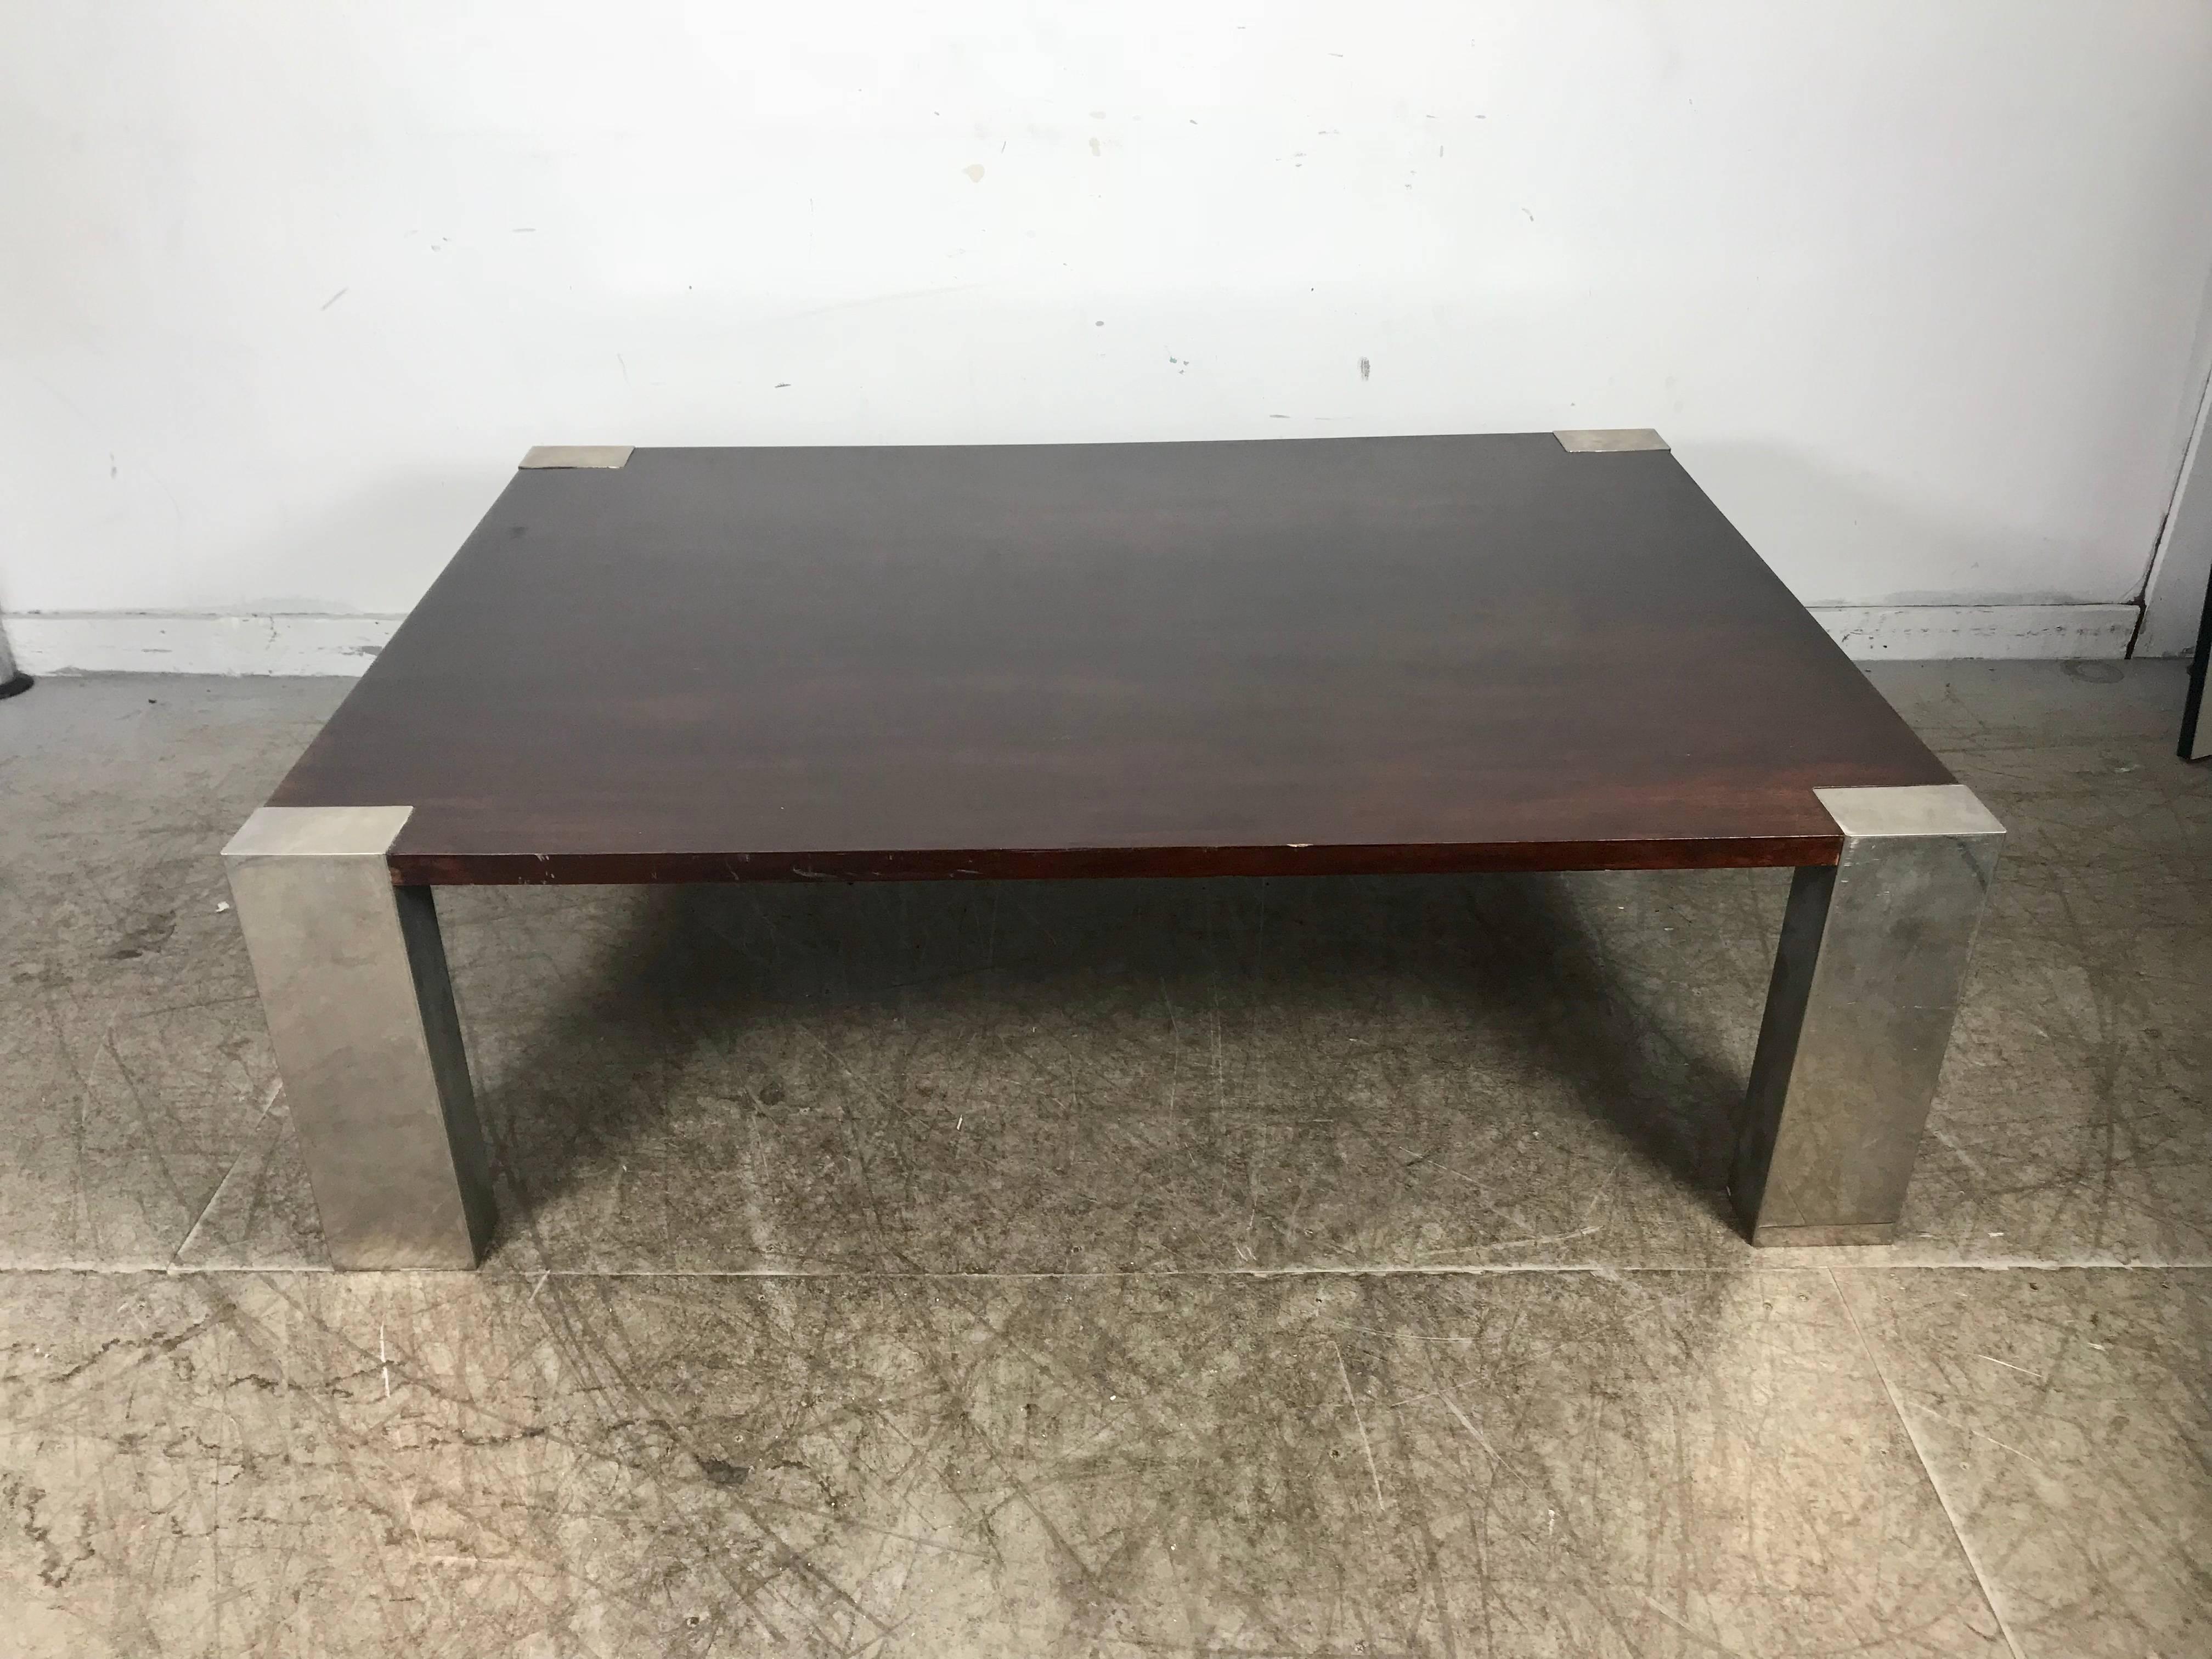 Monumental 1970s Stainless Steel and Wood Coffee Table In Good Condition For Sale In Buffalo, NY